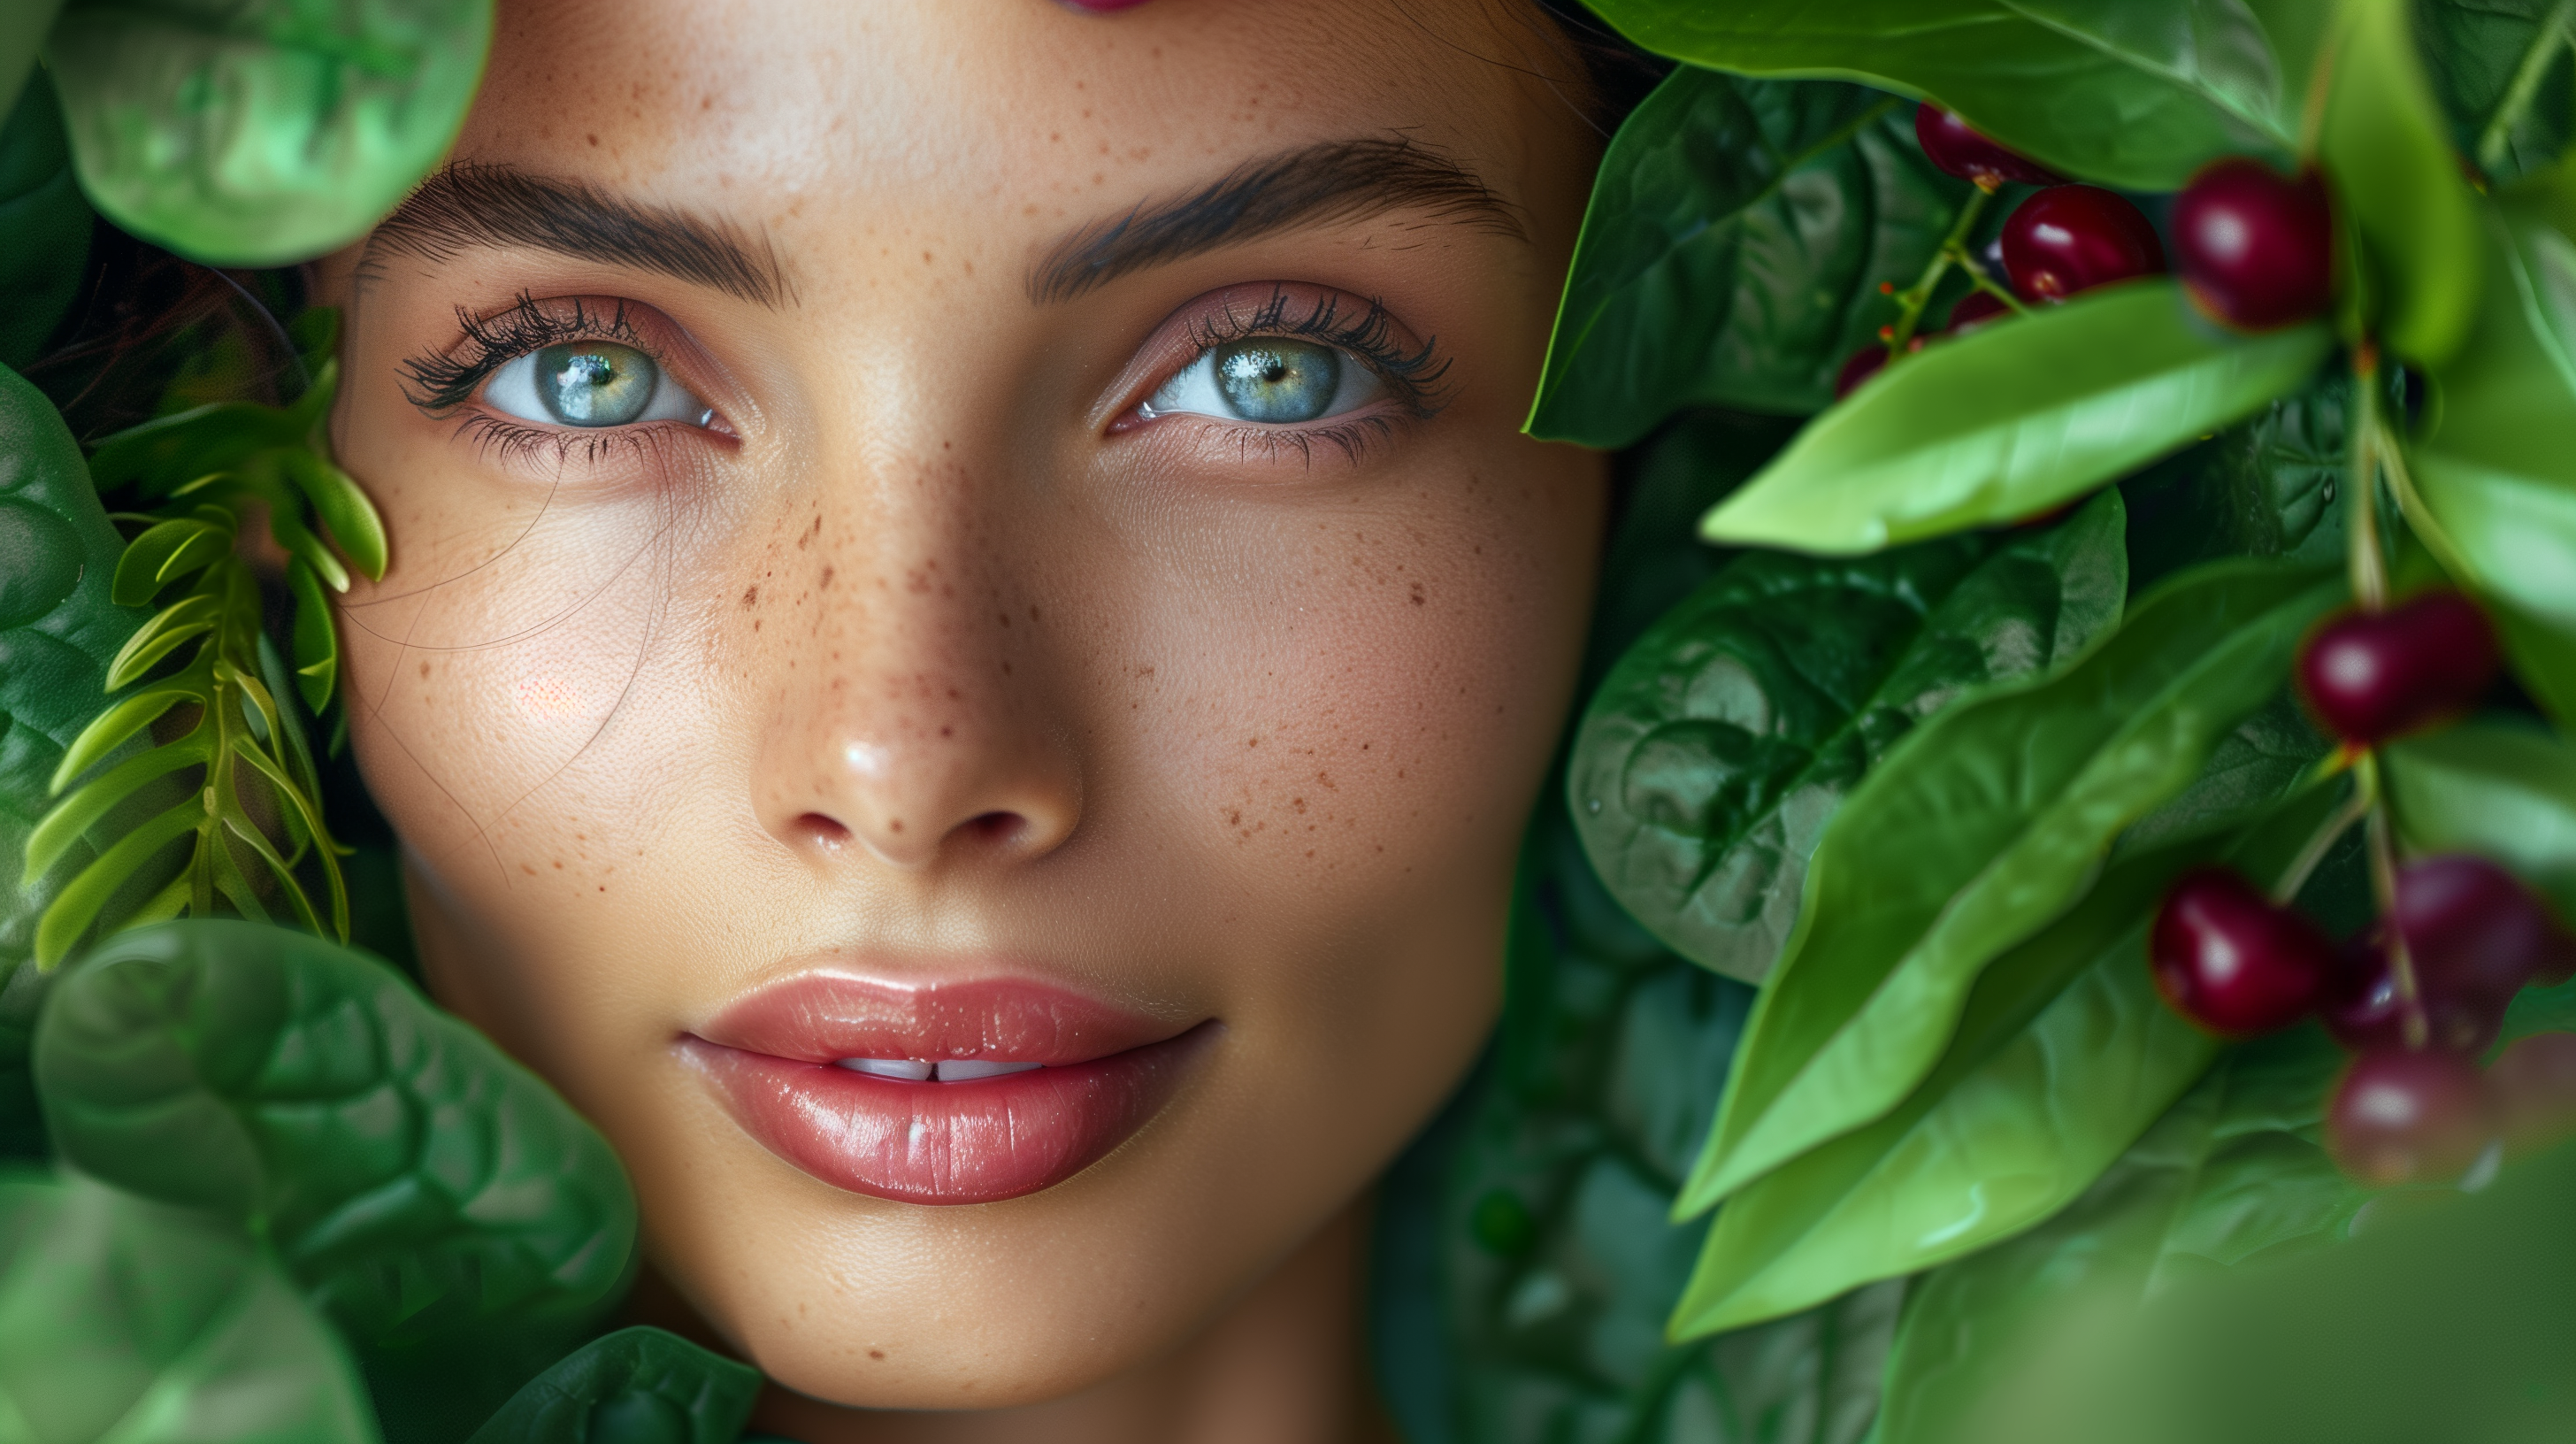 glowing, healthy face surrounded by fresh green spinach leaves and dark red berries